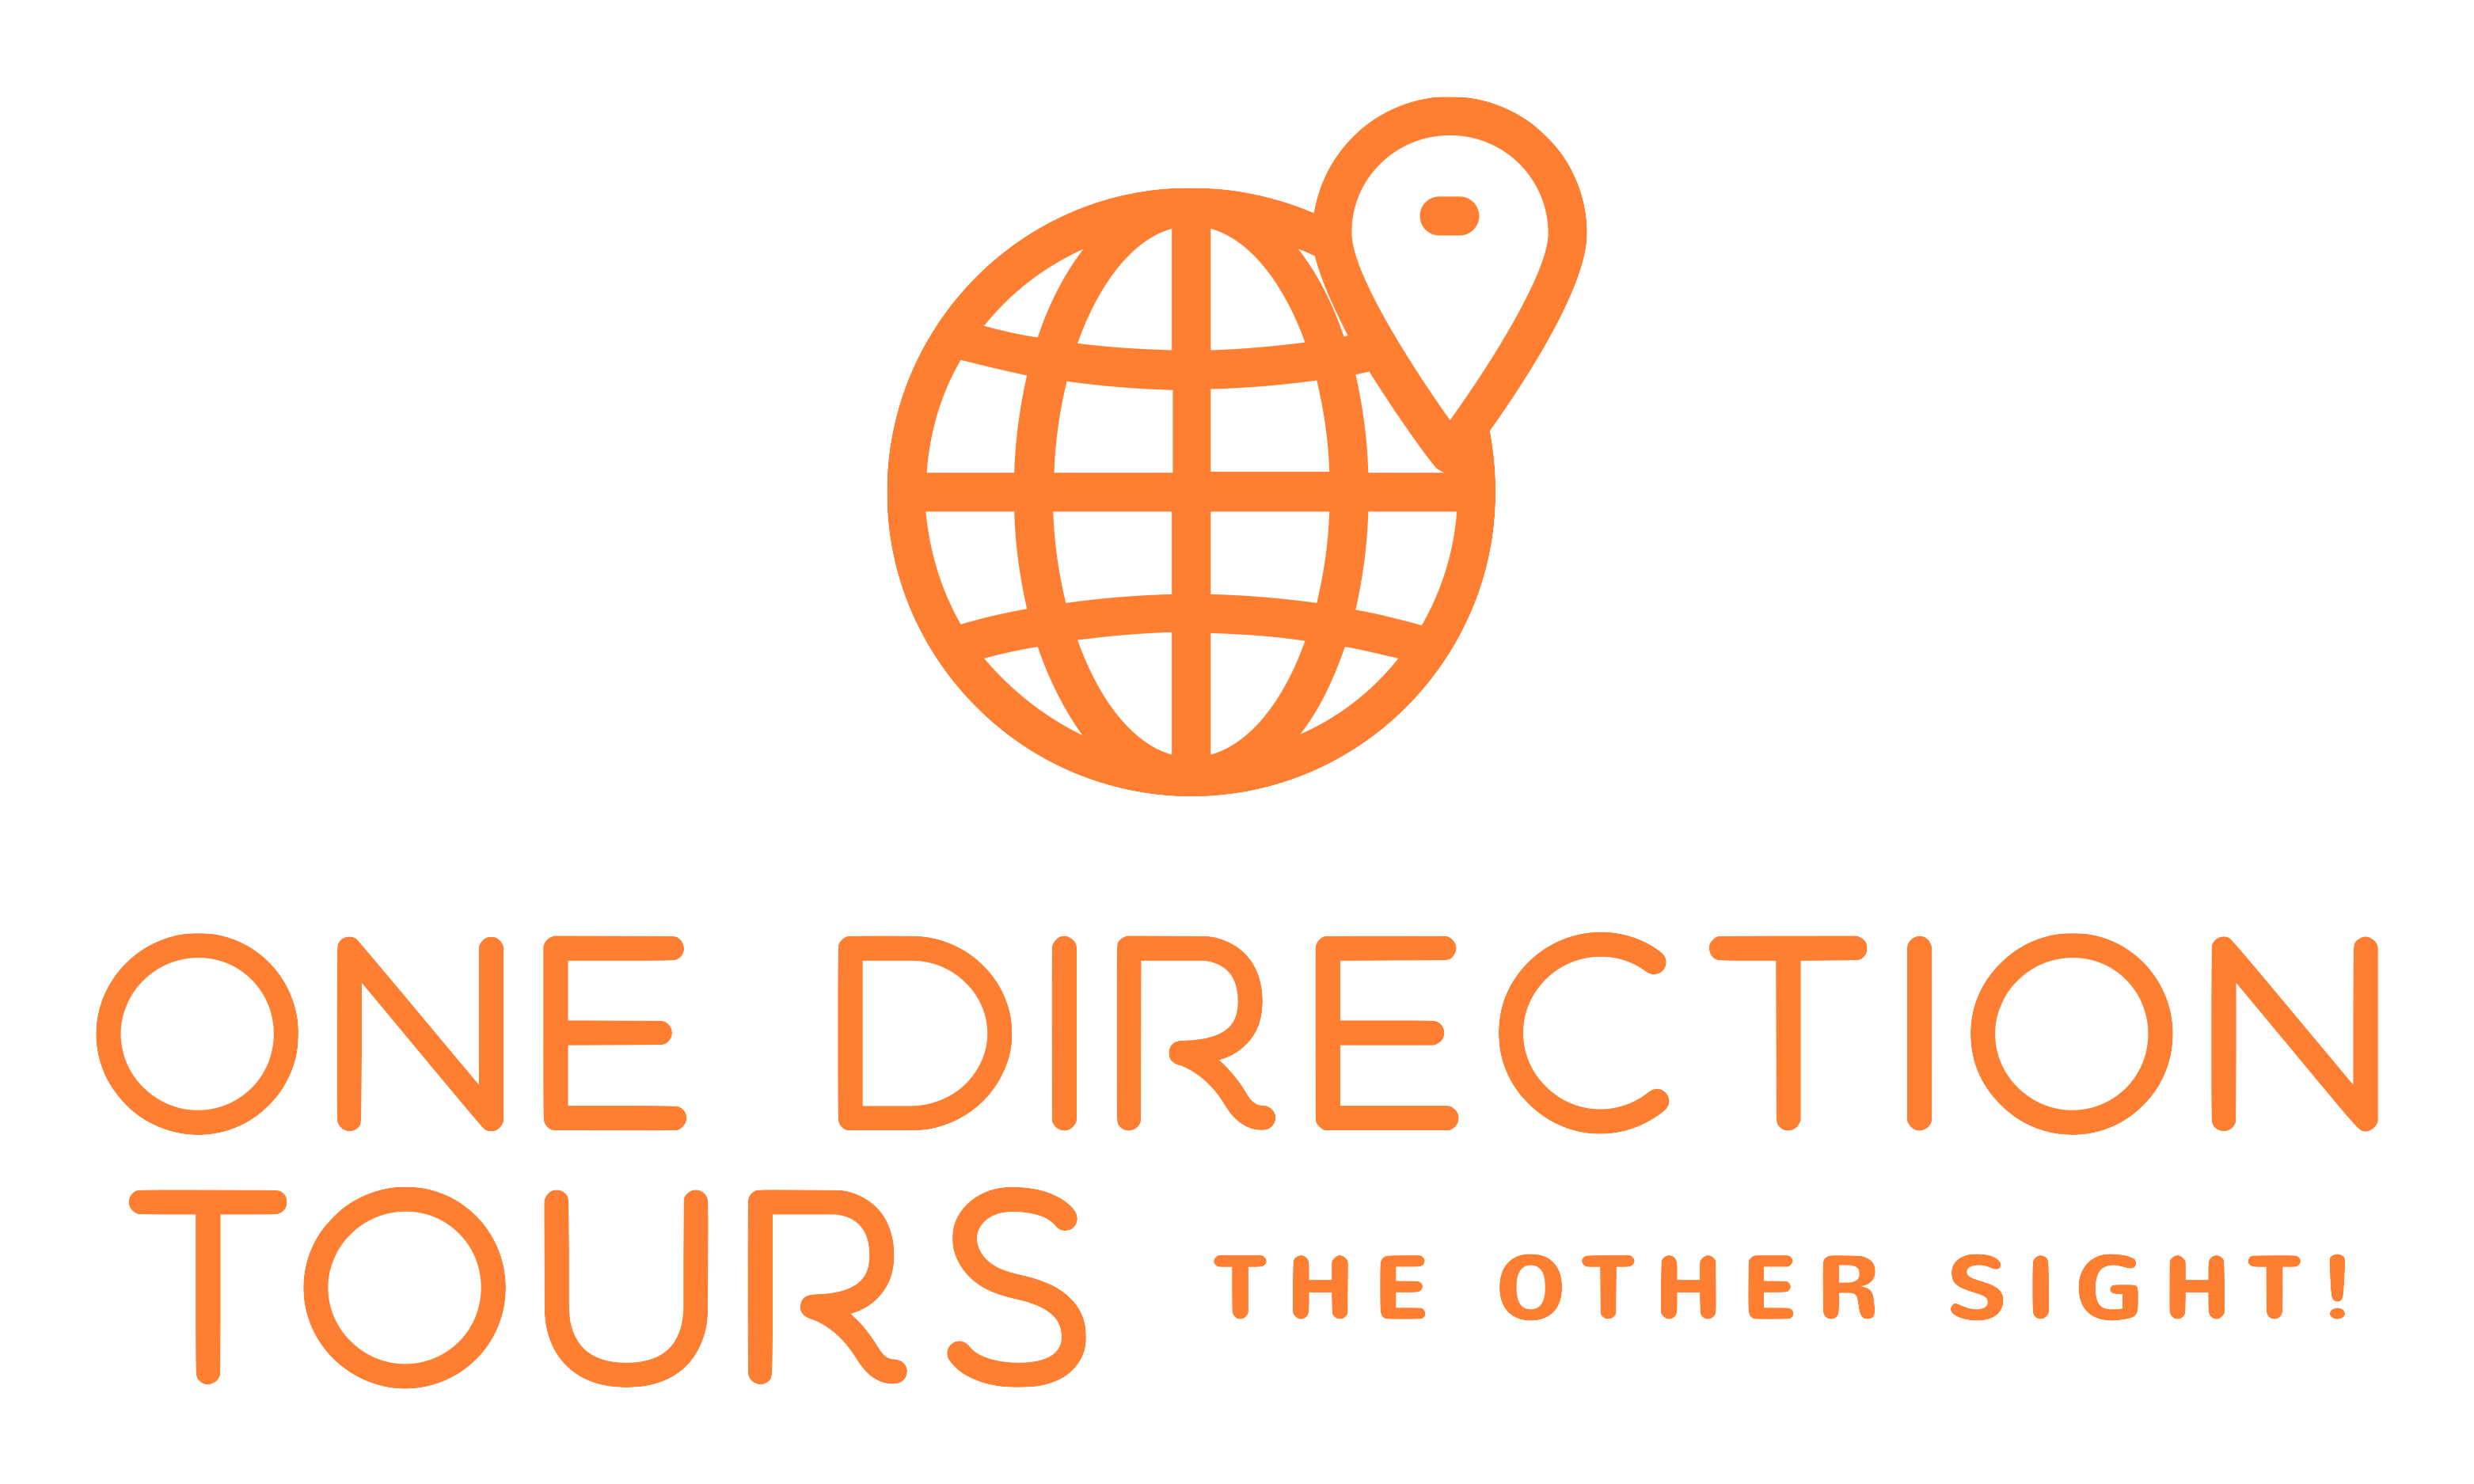 One Direction Tours